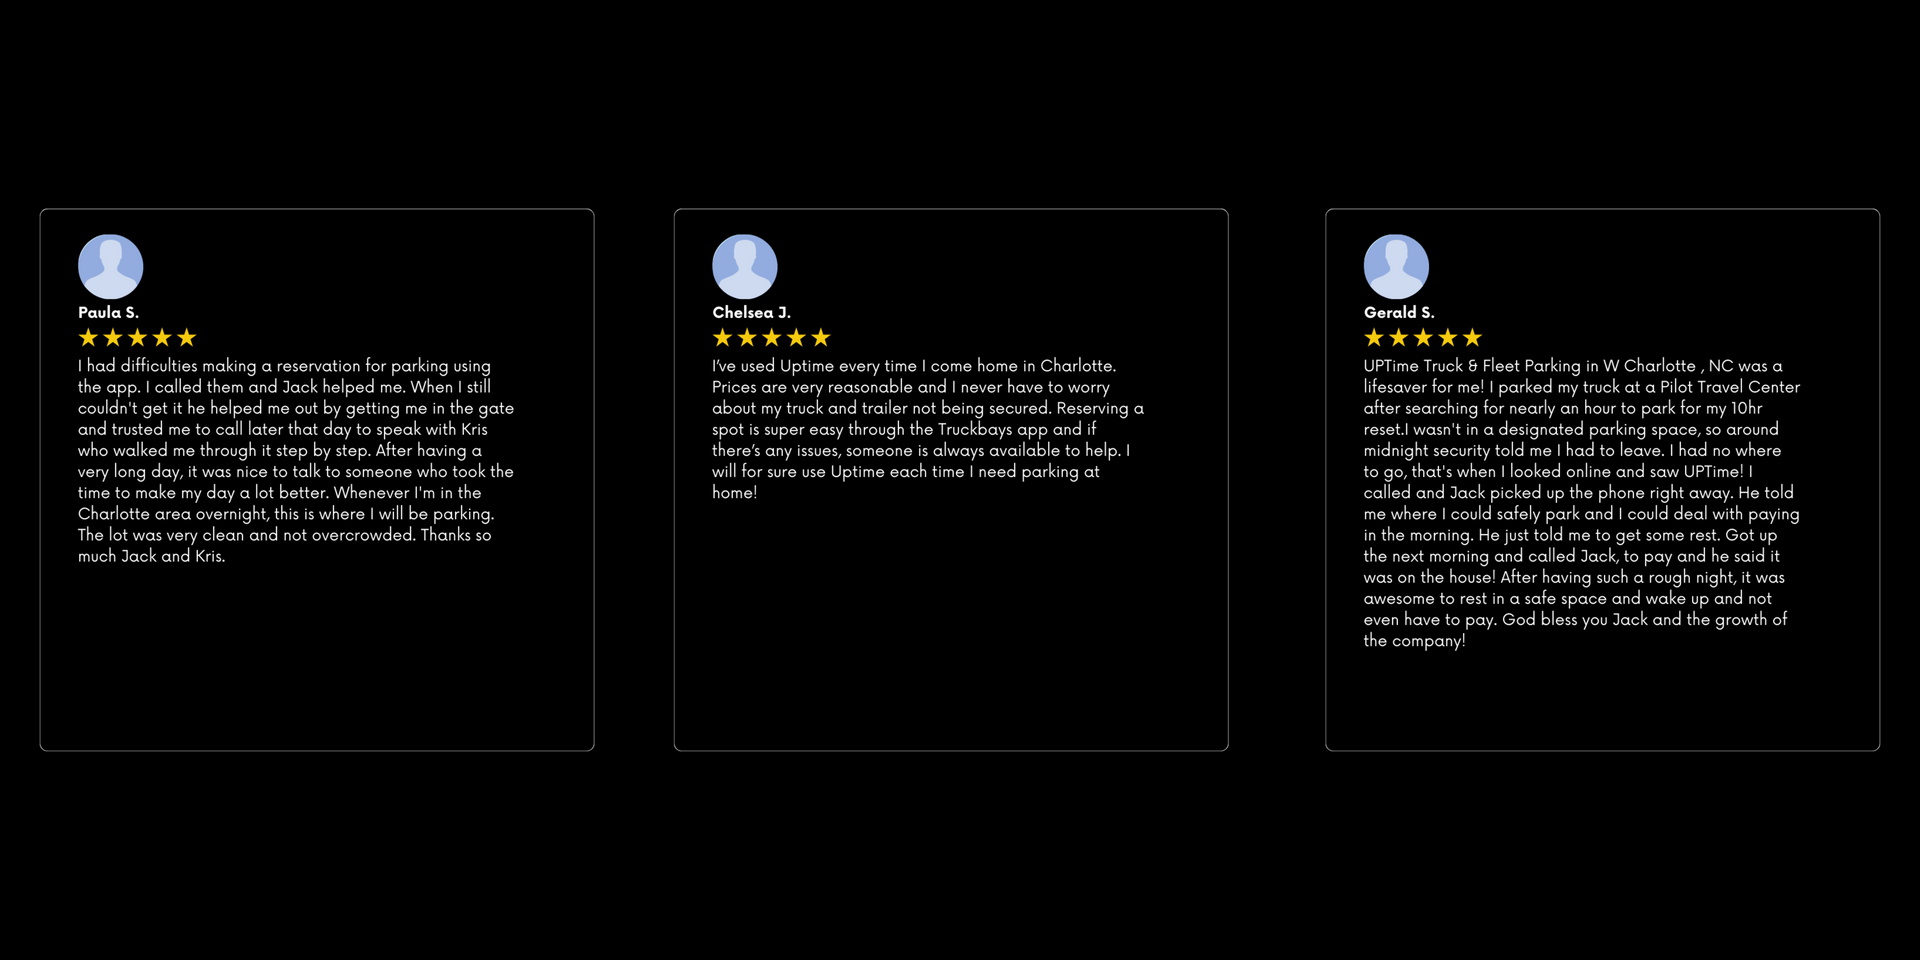 A row of three reviews on a black background.